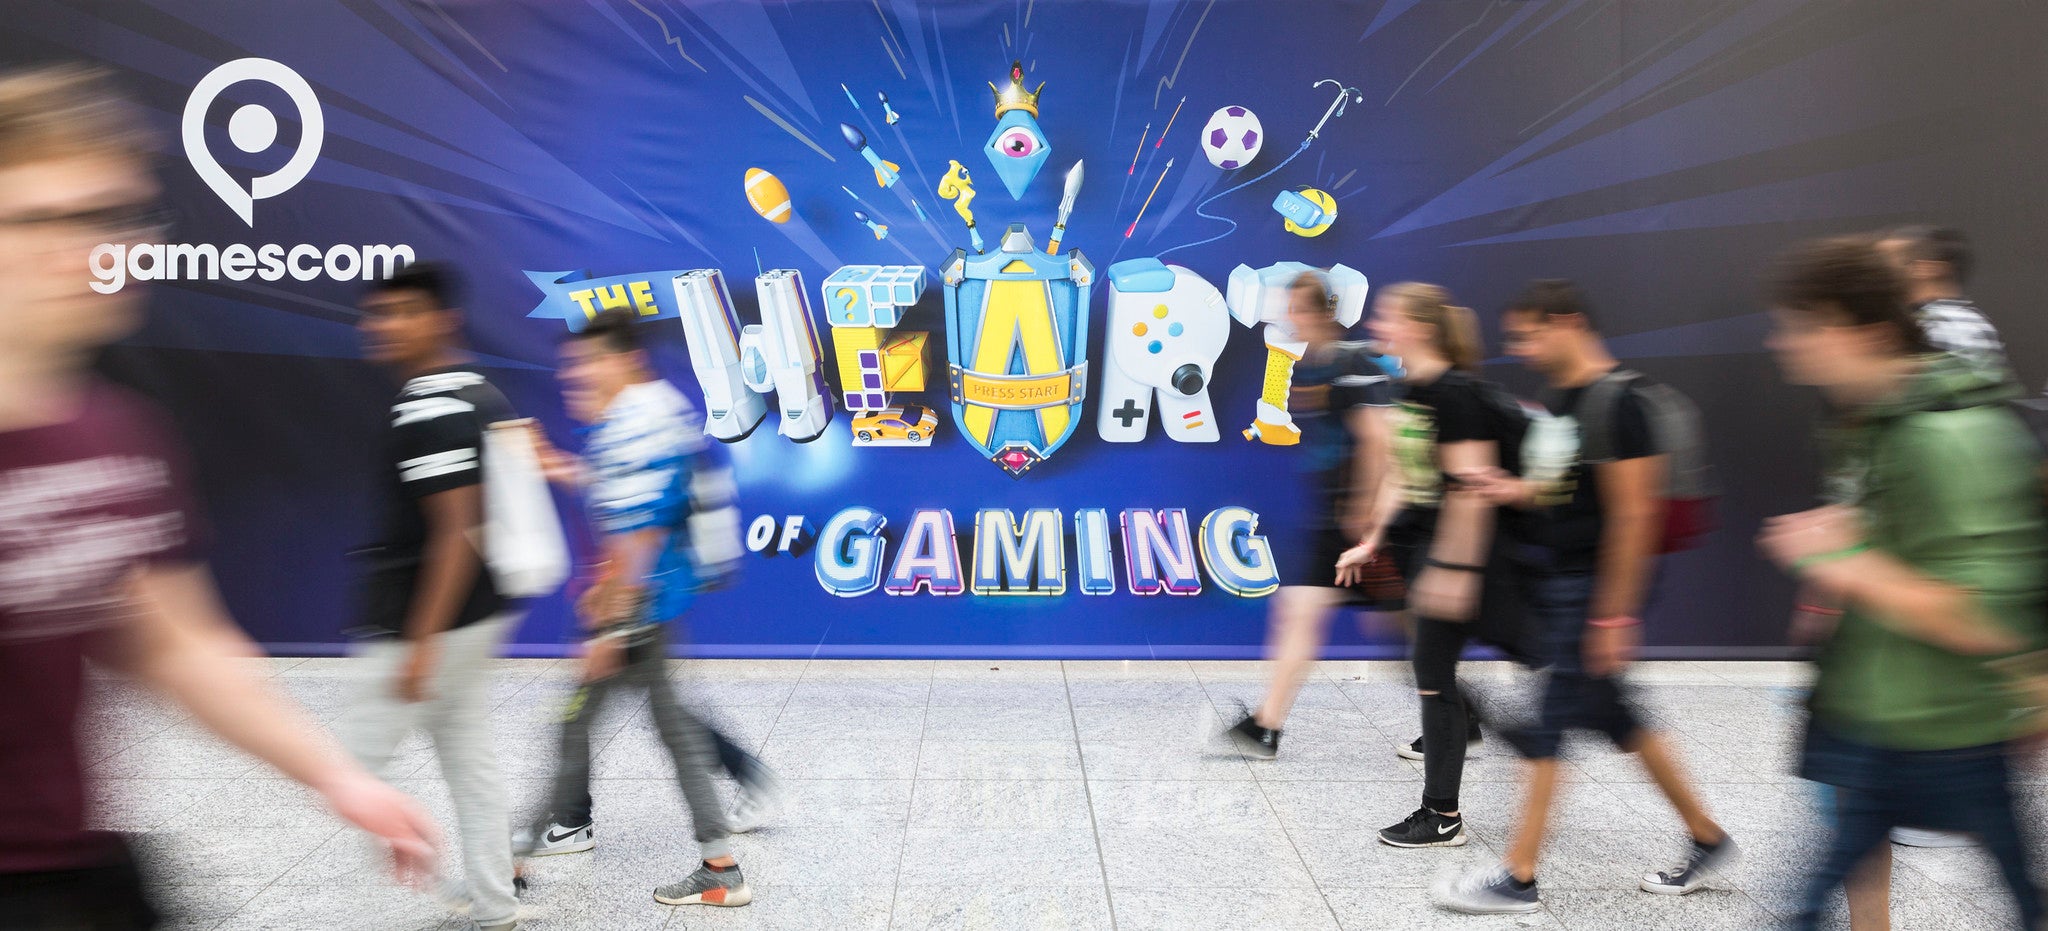 Image for Gamescom line-up includes Xbox, Ubisoft, Tencent, 2K Games, and more